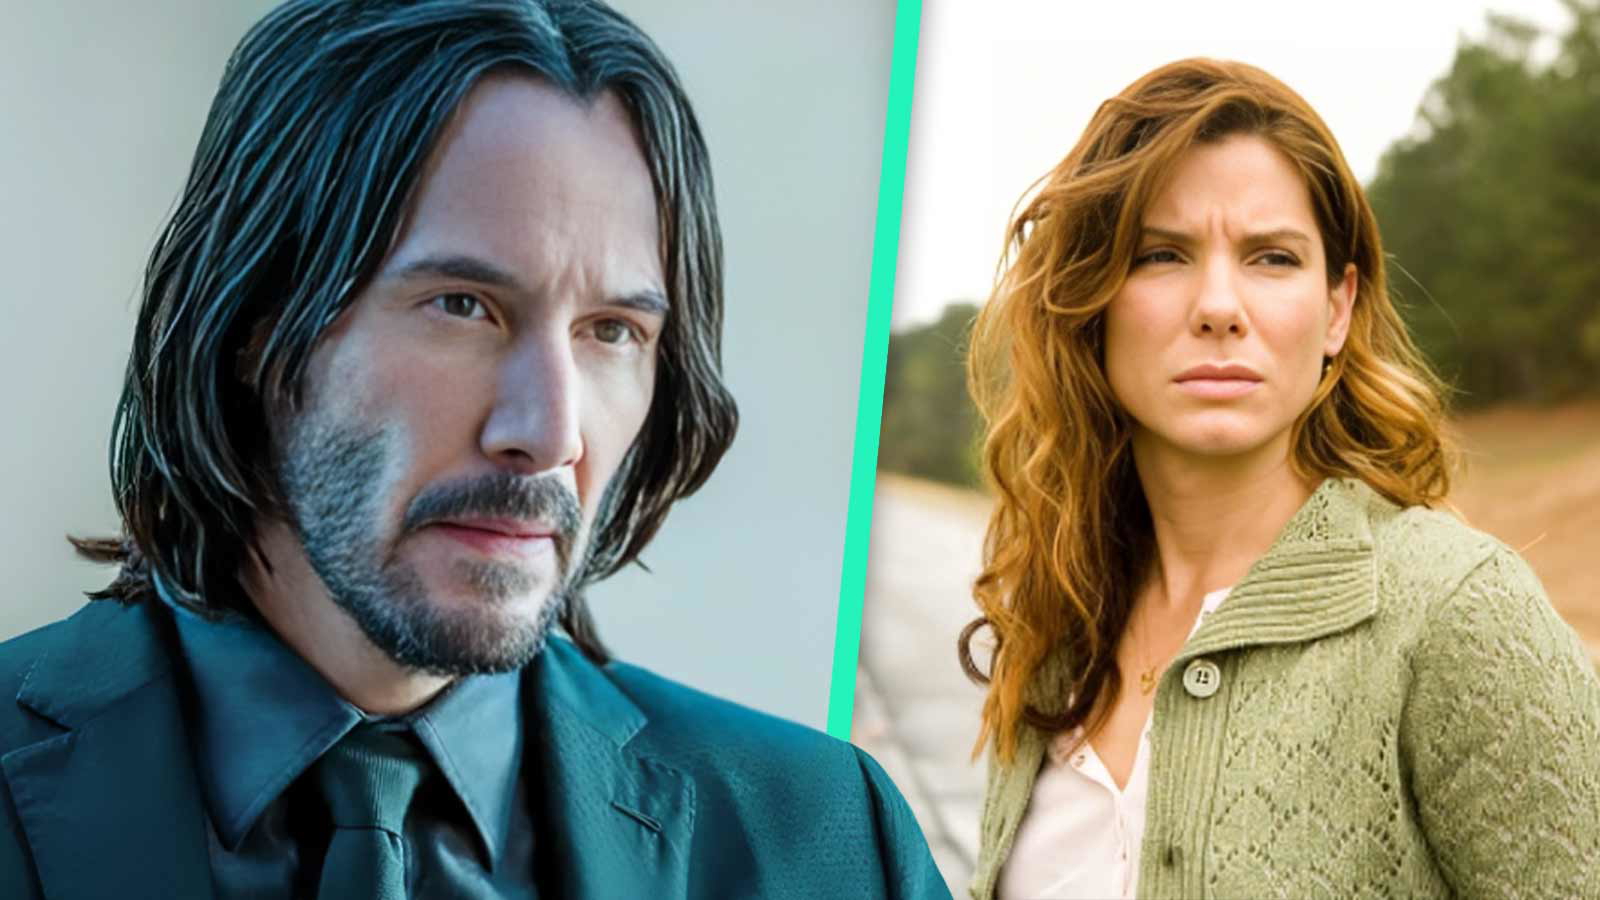 “I remember the script and I was like, ‘Eh?”: Even Keanu Reeves Wasn’t Impressed With the Script for His Iconic Movie With Sandra Bullock That Needs a Threequel Soon